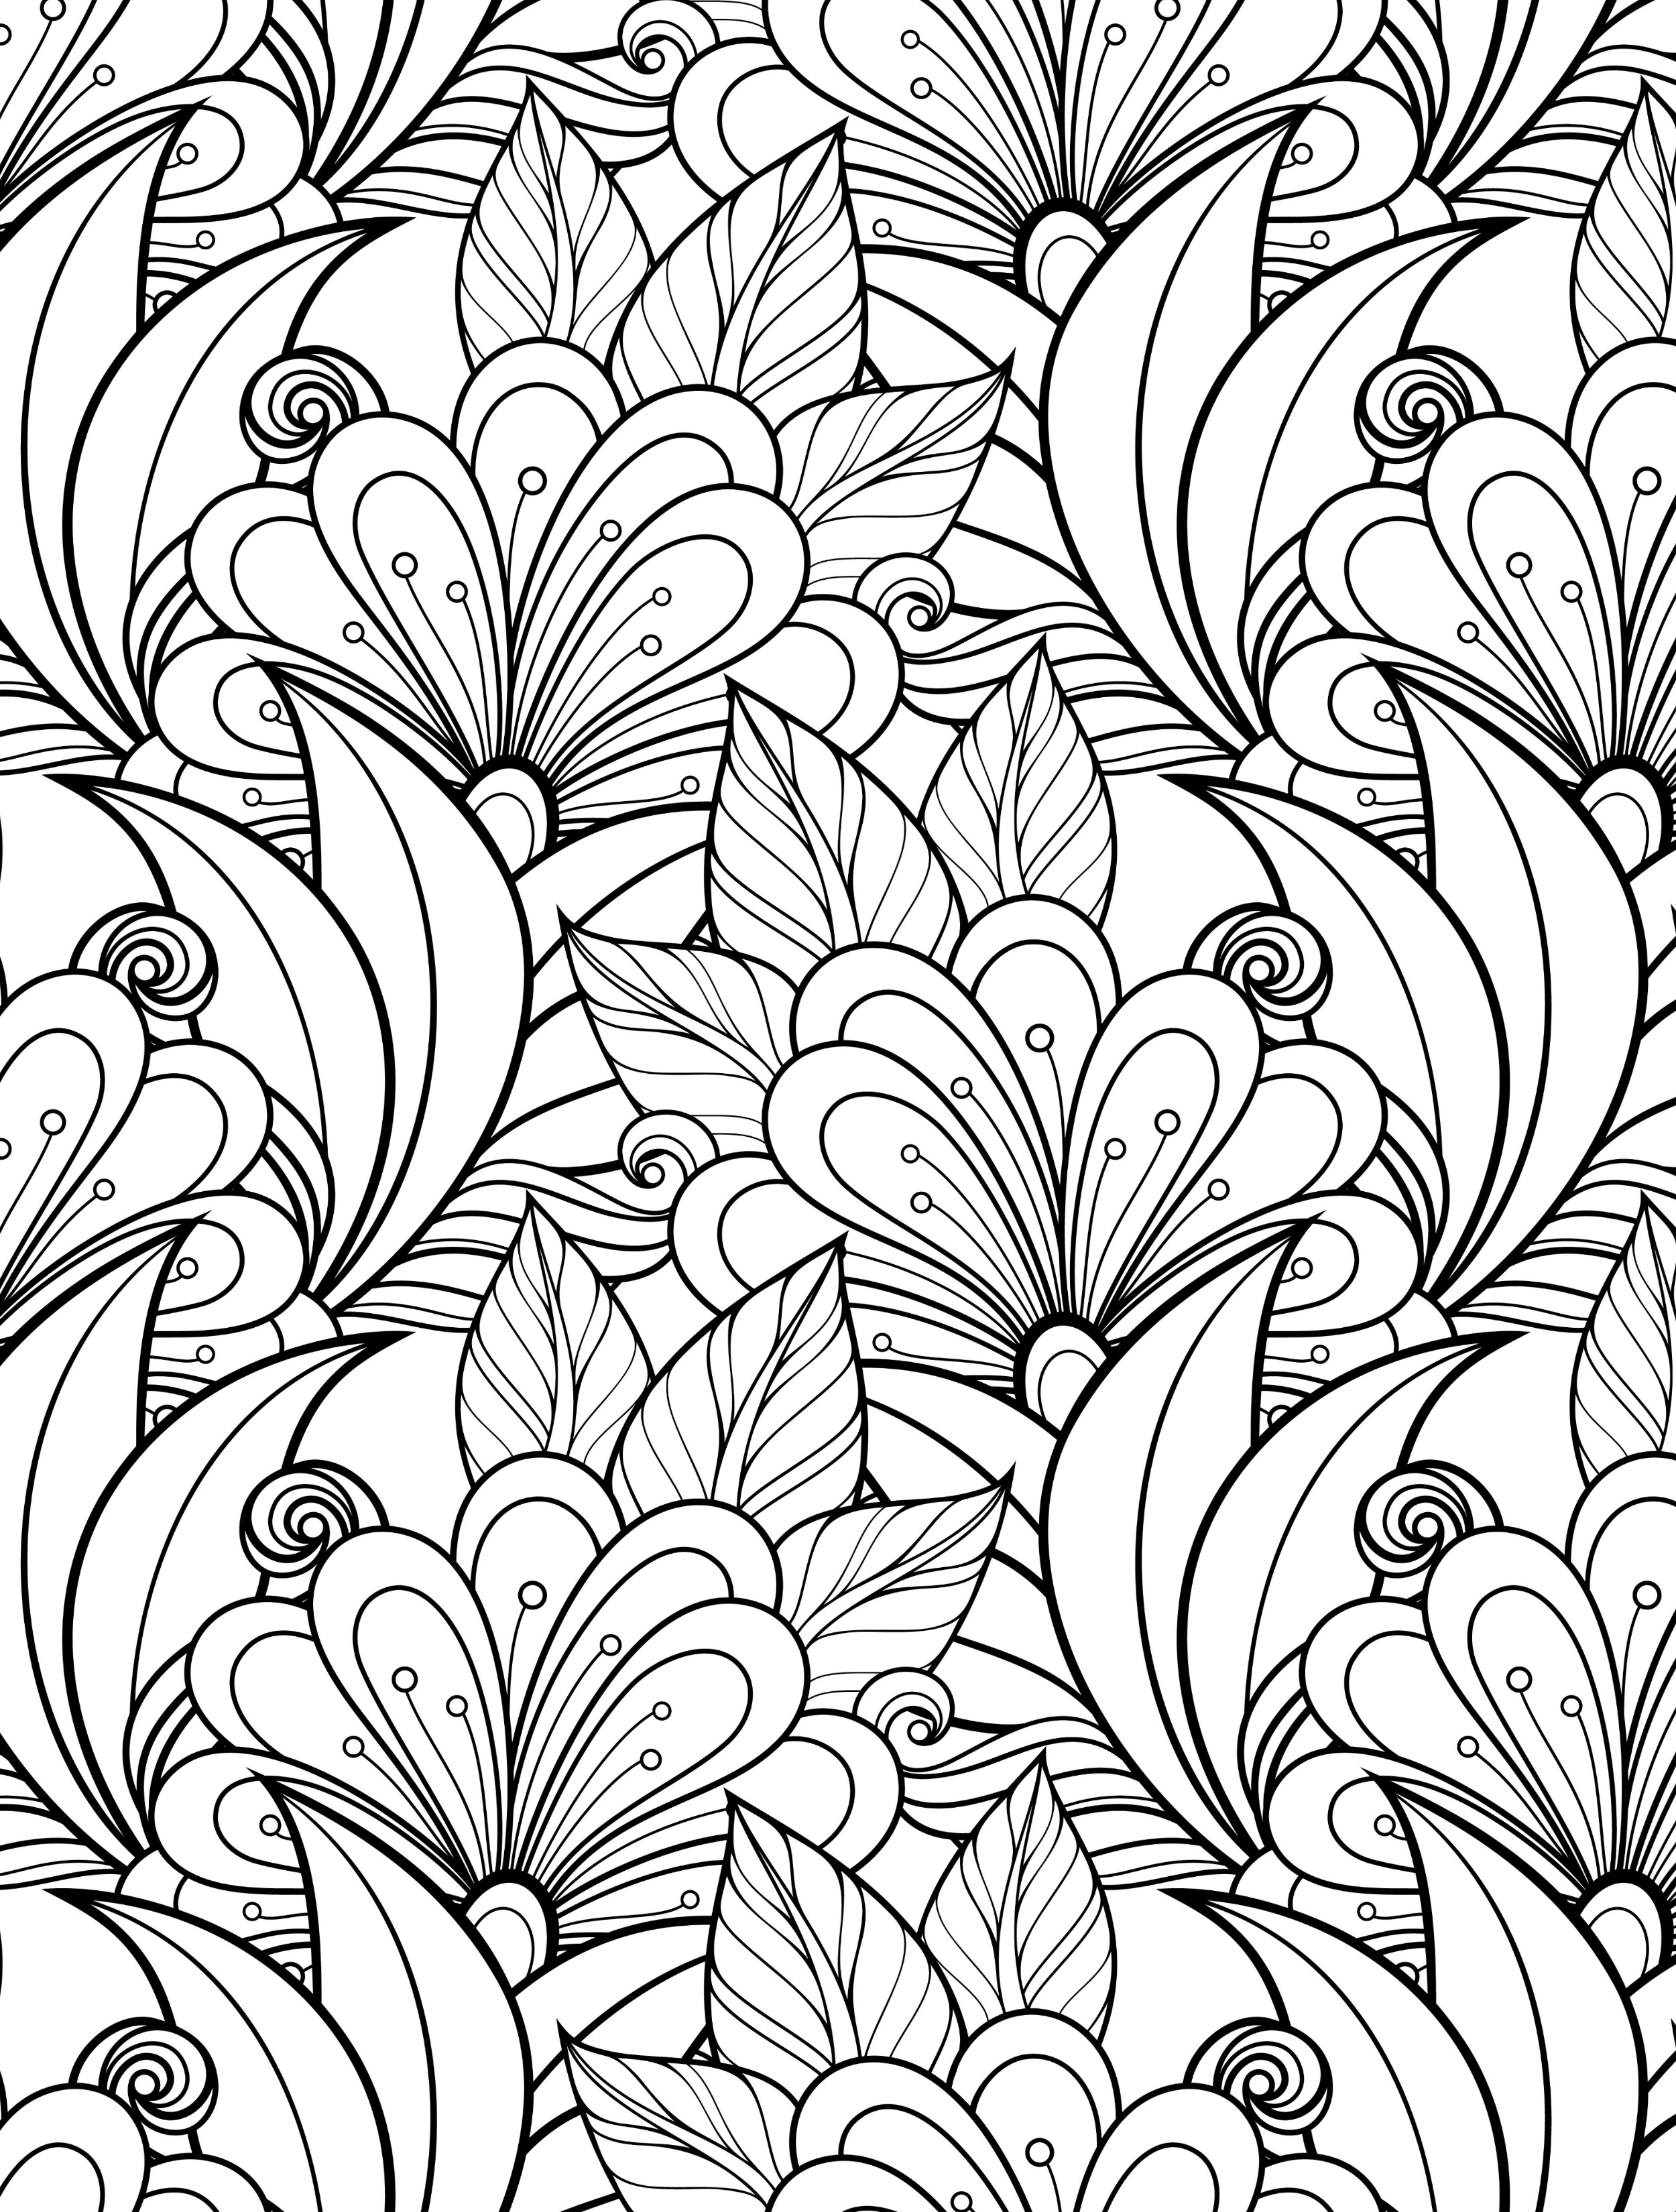 Download Floral Coloring Pages for Adults - Best Coloring Pages For Kids